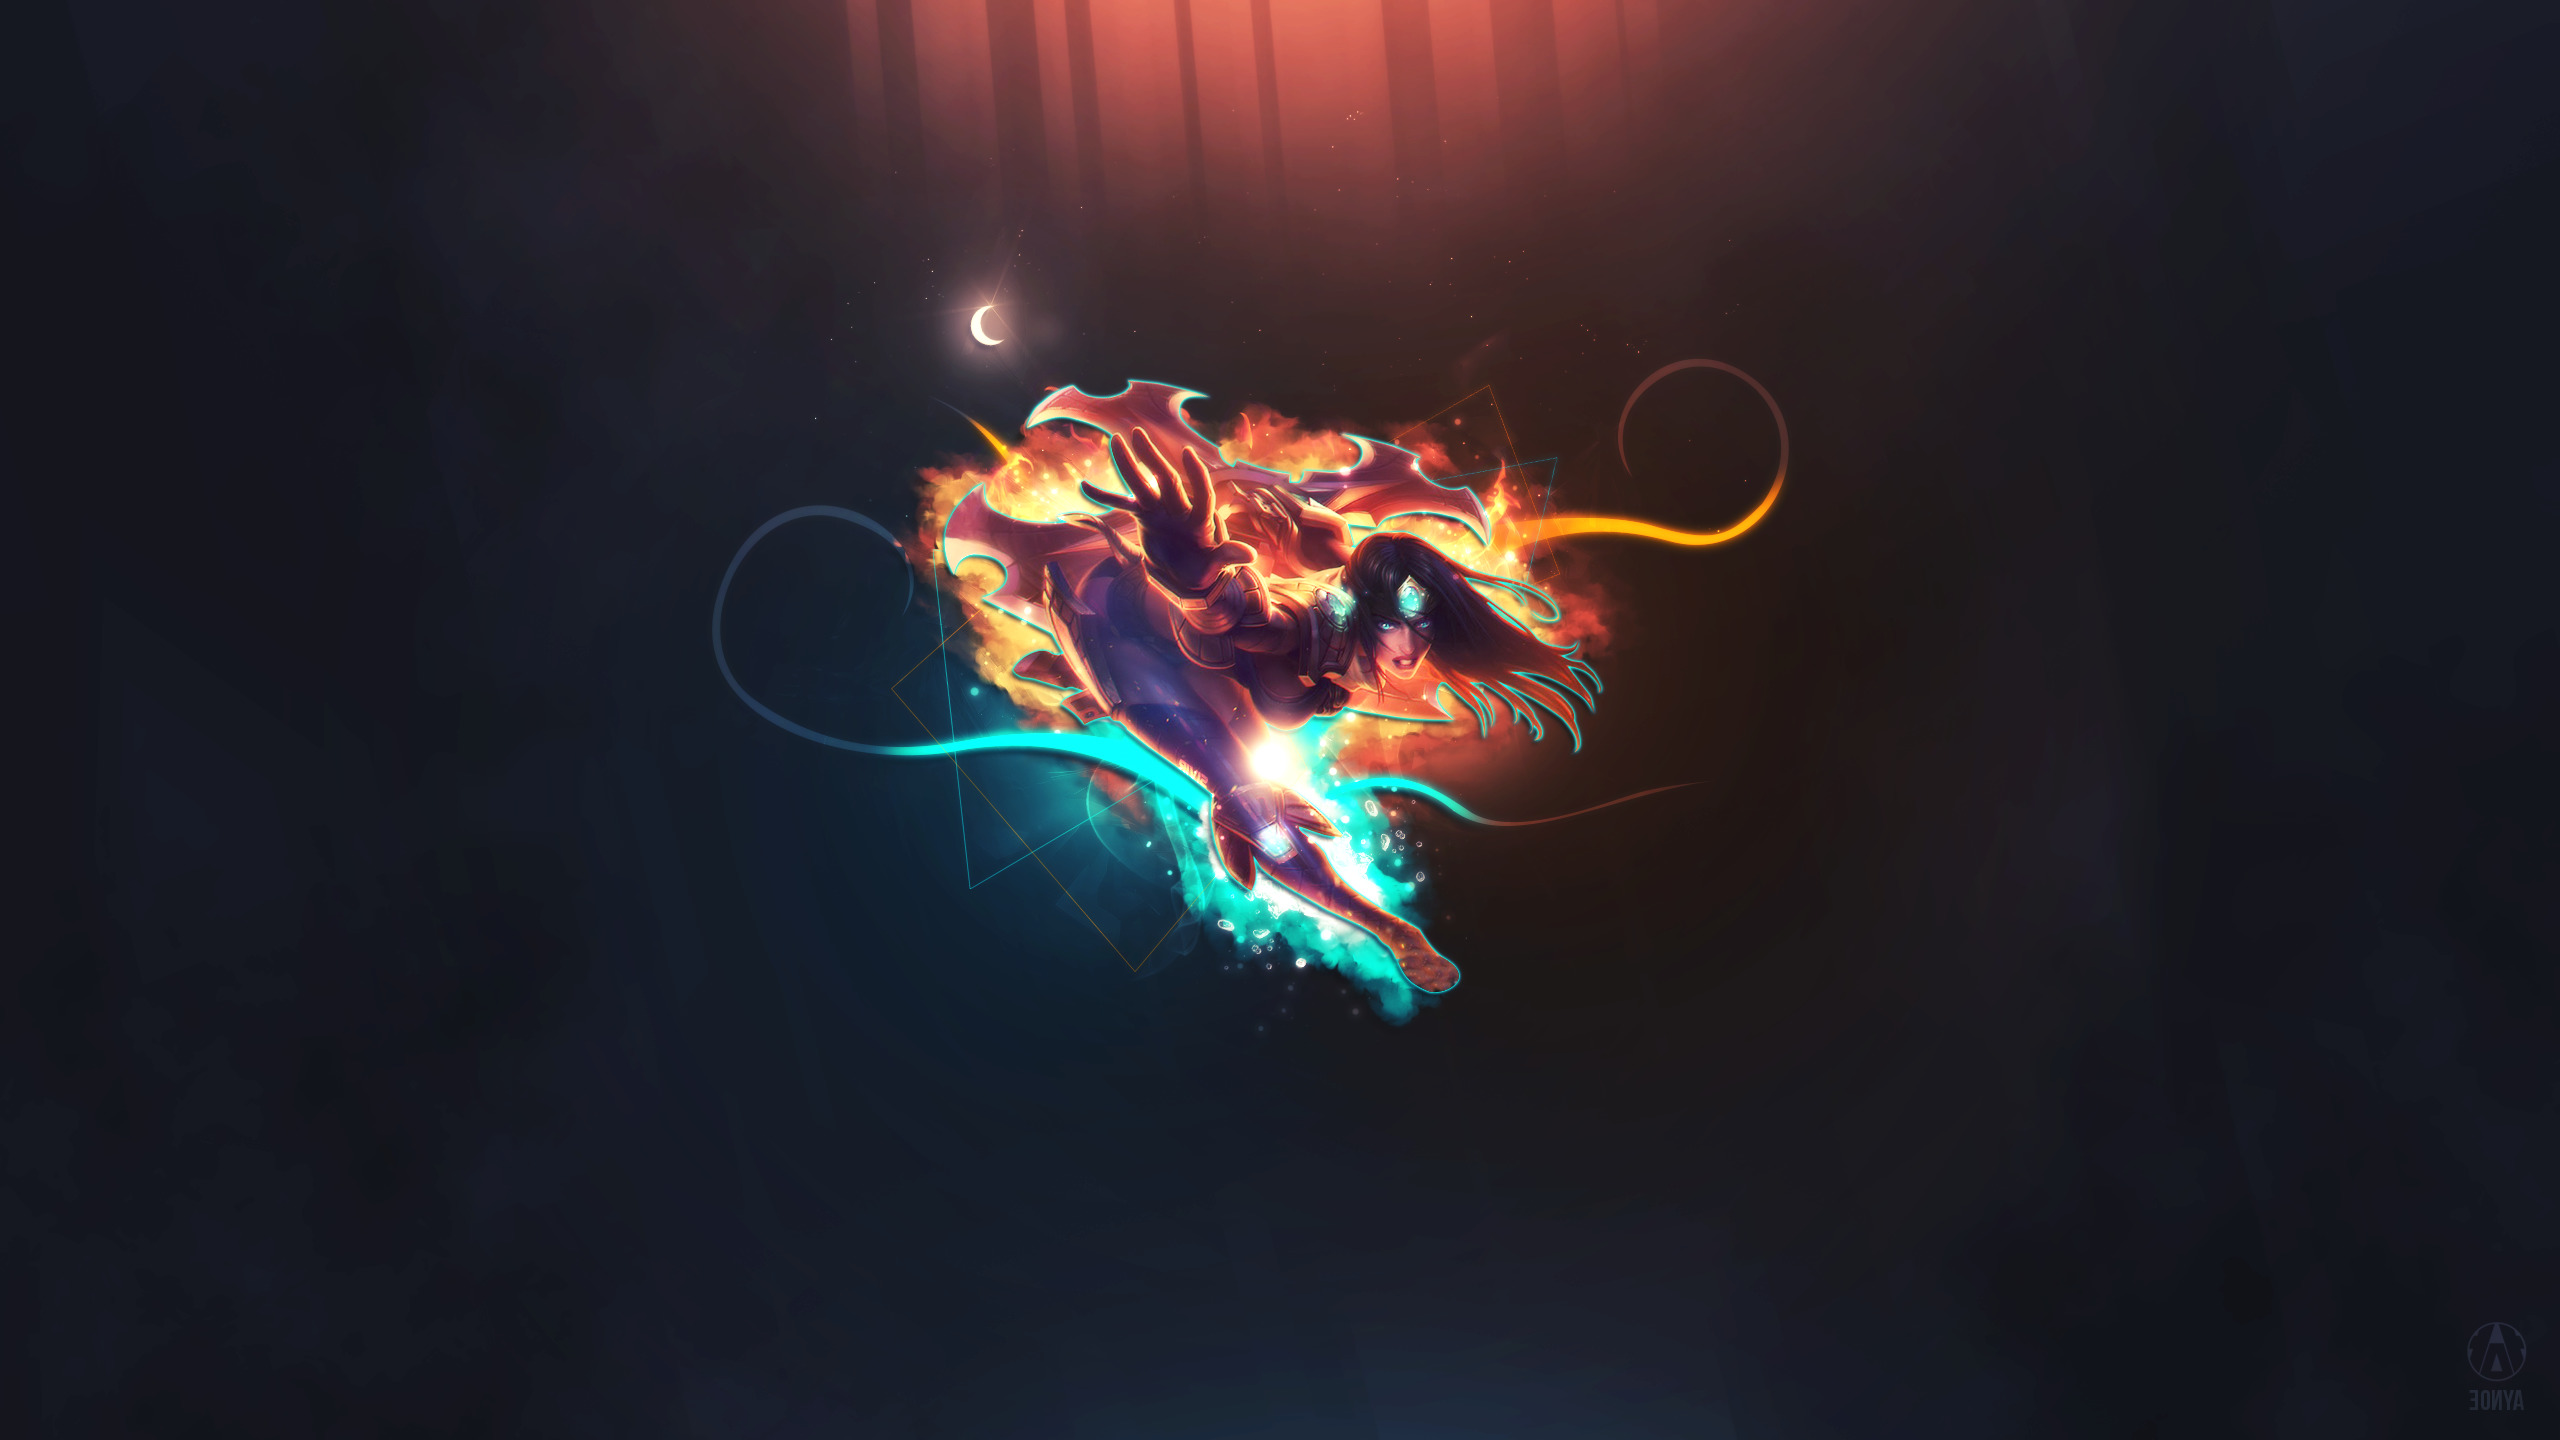 League Of Legends Adc Wallpapers